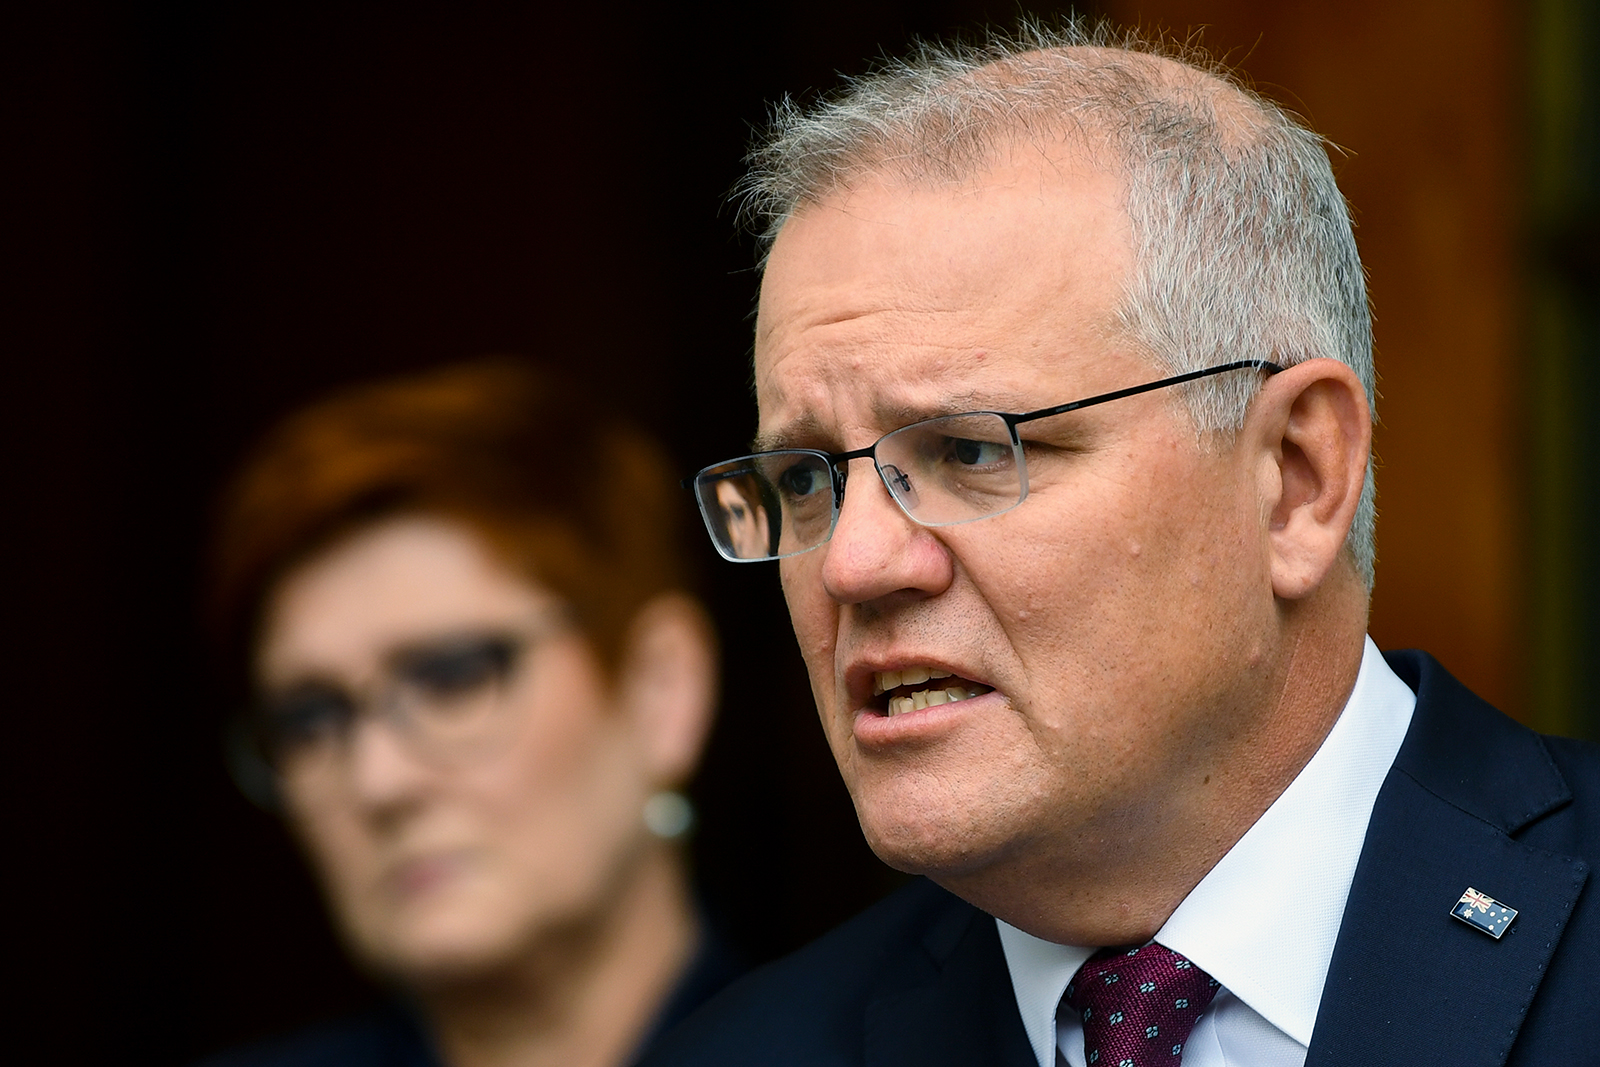 Australian Prime Minister Scott Morrison speaks to the media during a news conference at Parliament House in Canberra, Australia, on March 17